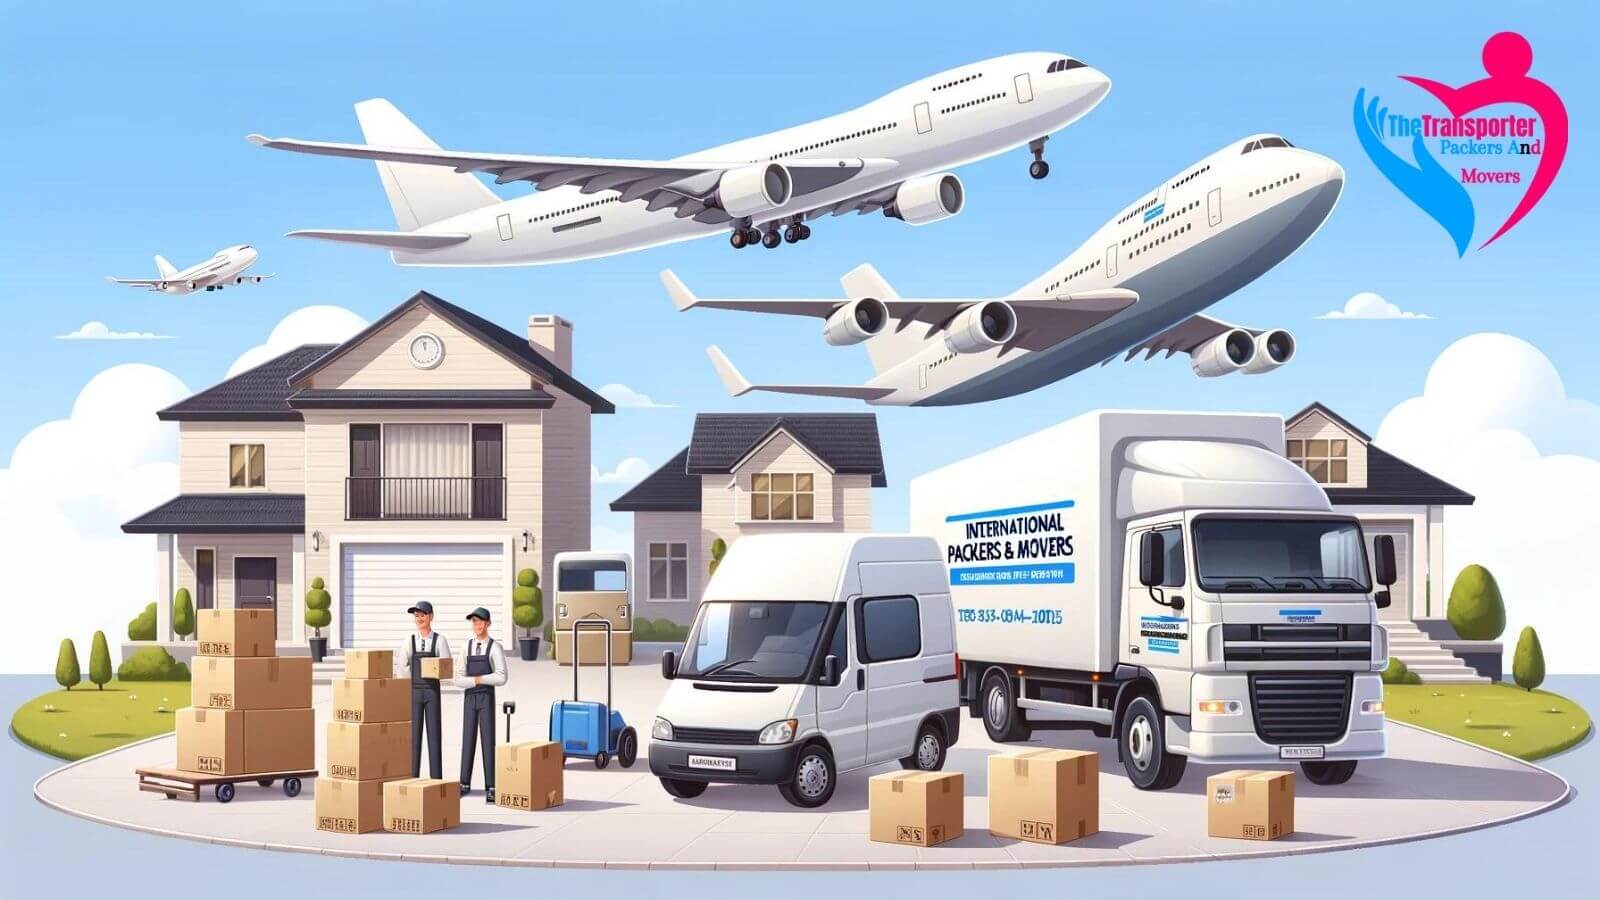 Ludhiana International Packers and Movers: Ensuring a Smooth Move